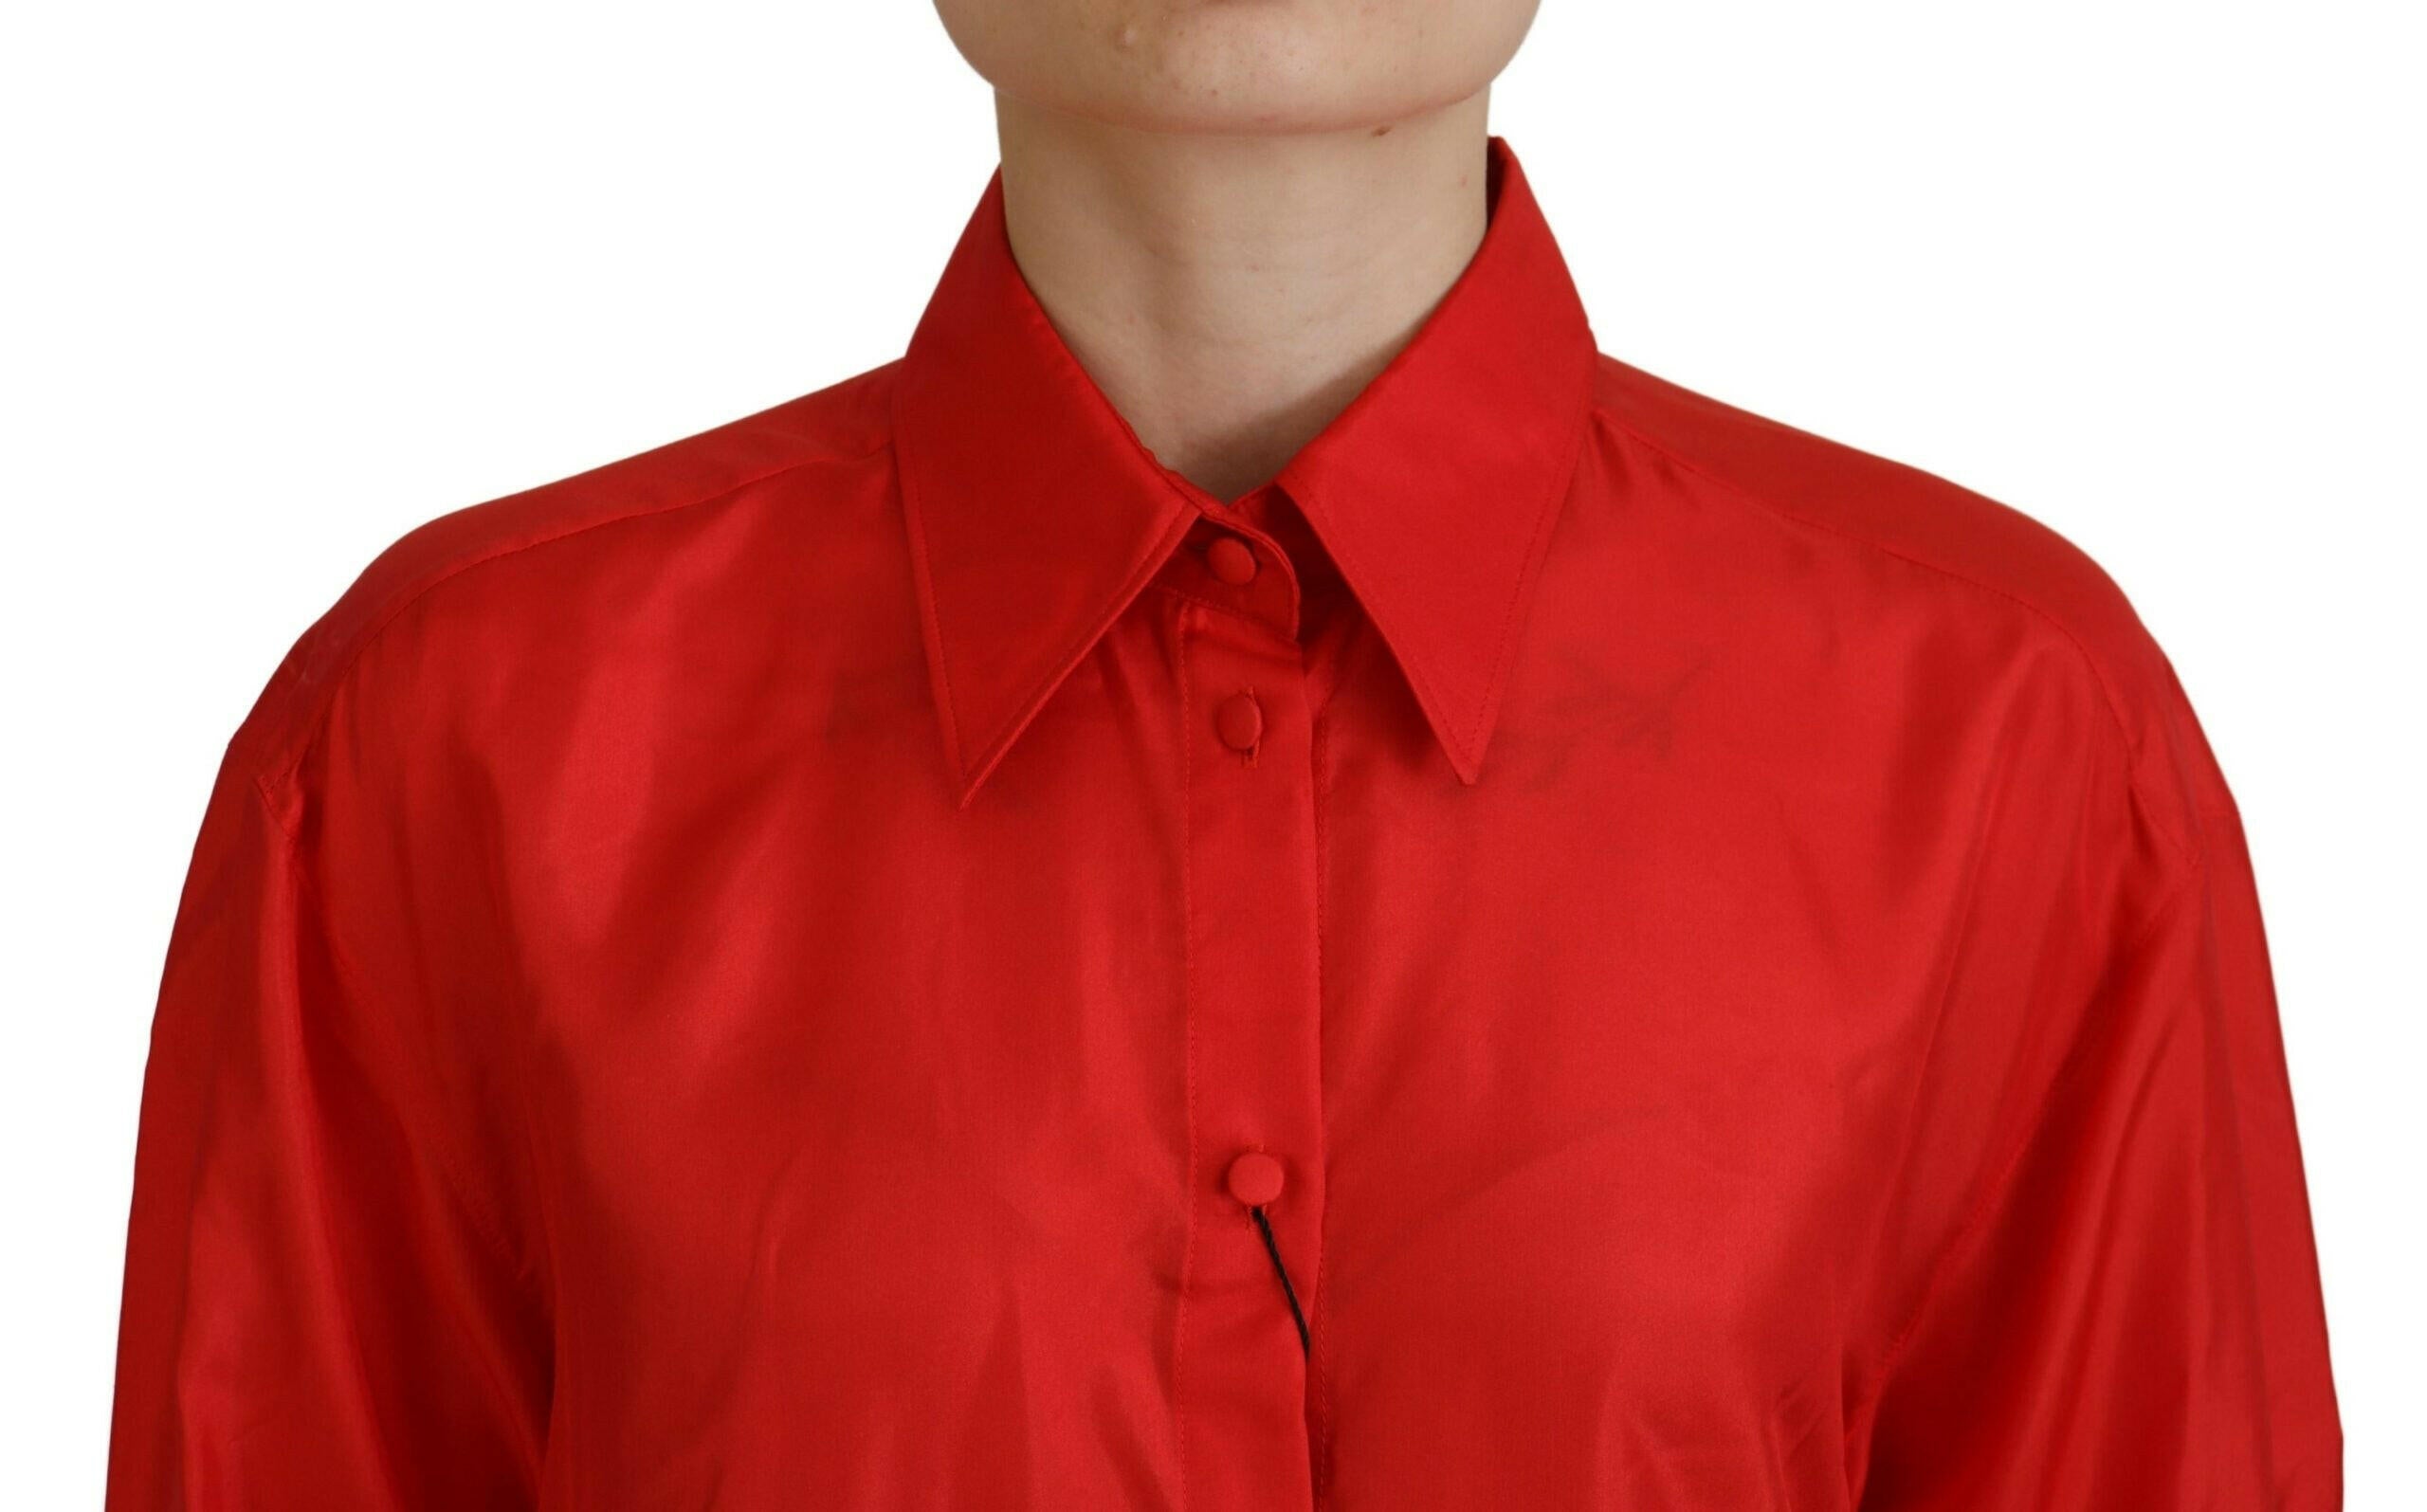 Dolce & Gabbana Red Silk Collared Long Sleeves Dress Shirt Top - GENUINE AUTHENTIC BRAND LLC  